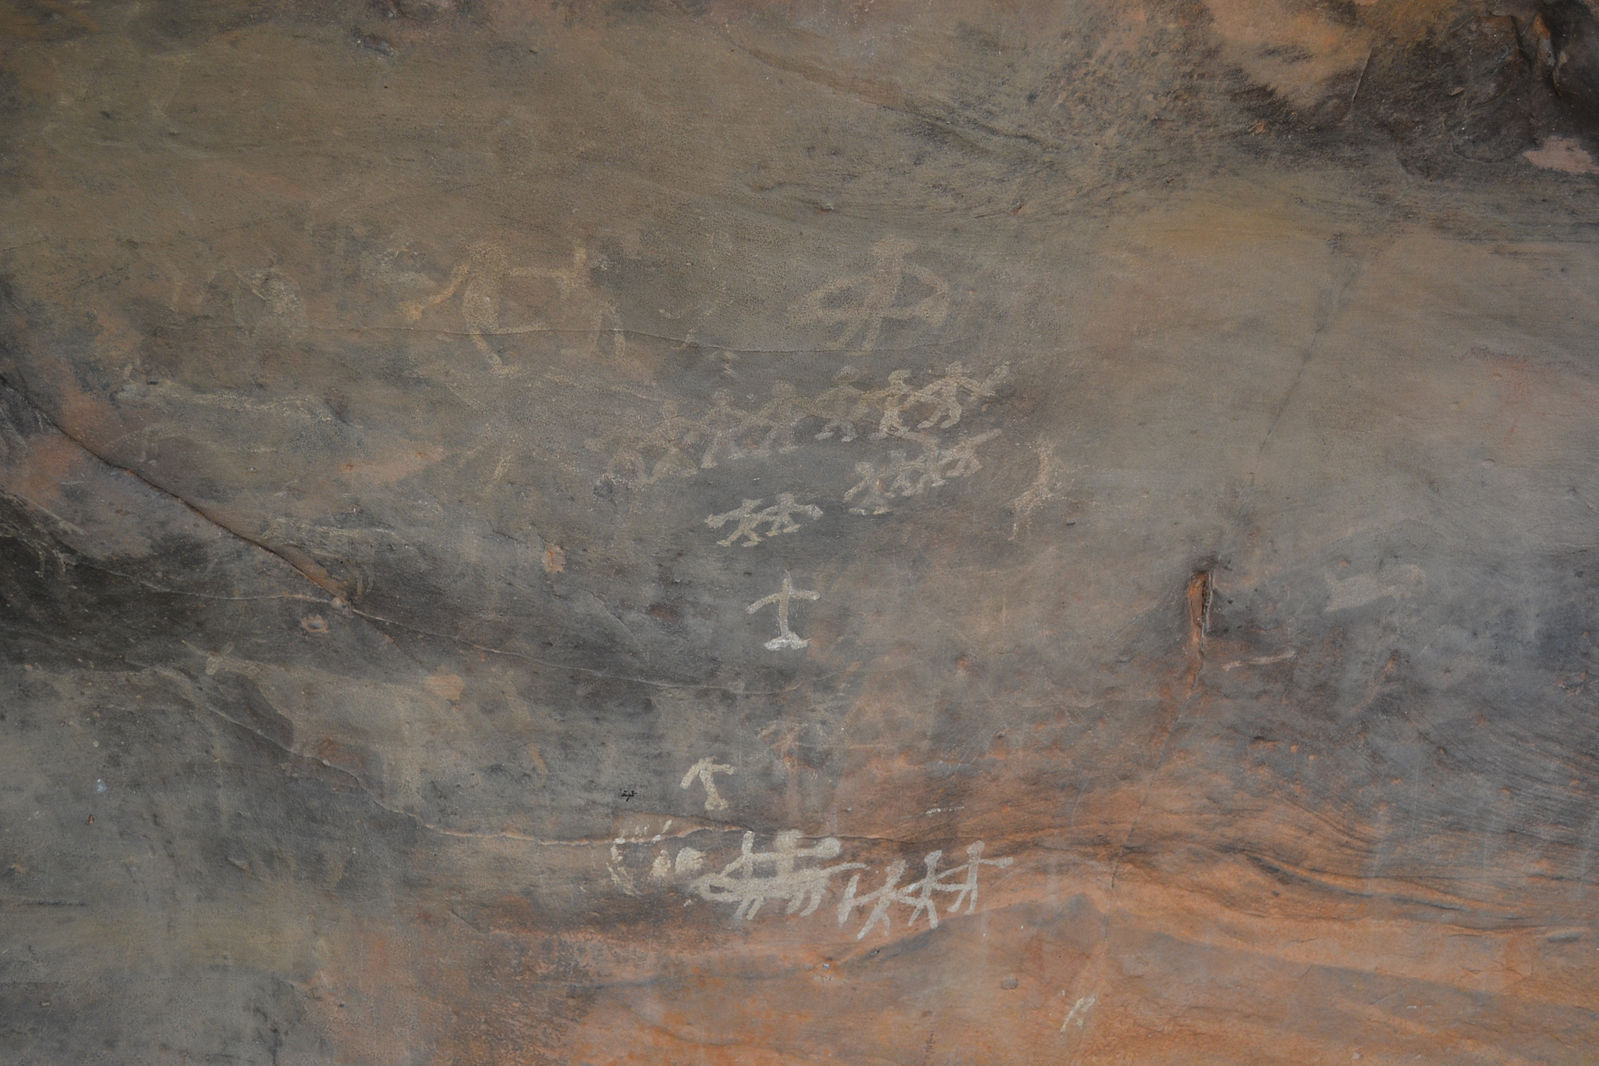 The Mesolithic people shown dancing in a cave painting in Bhimbetka rock shelters.